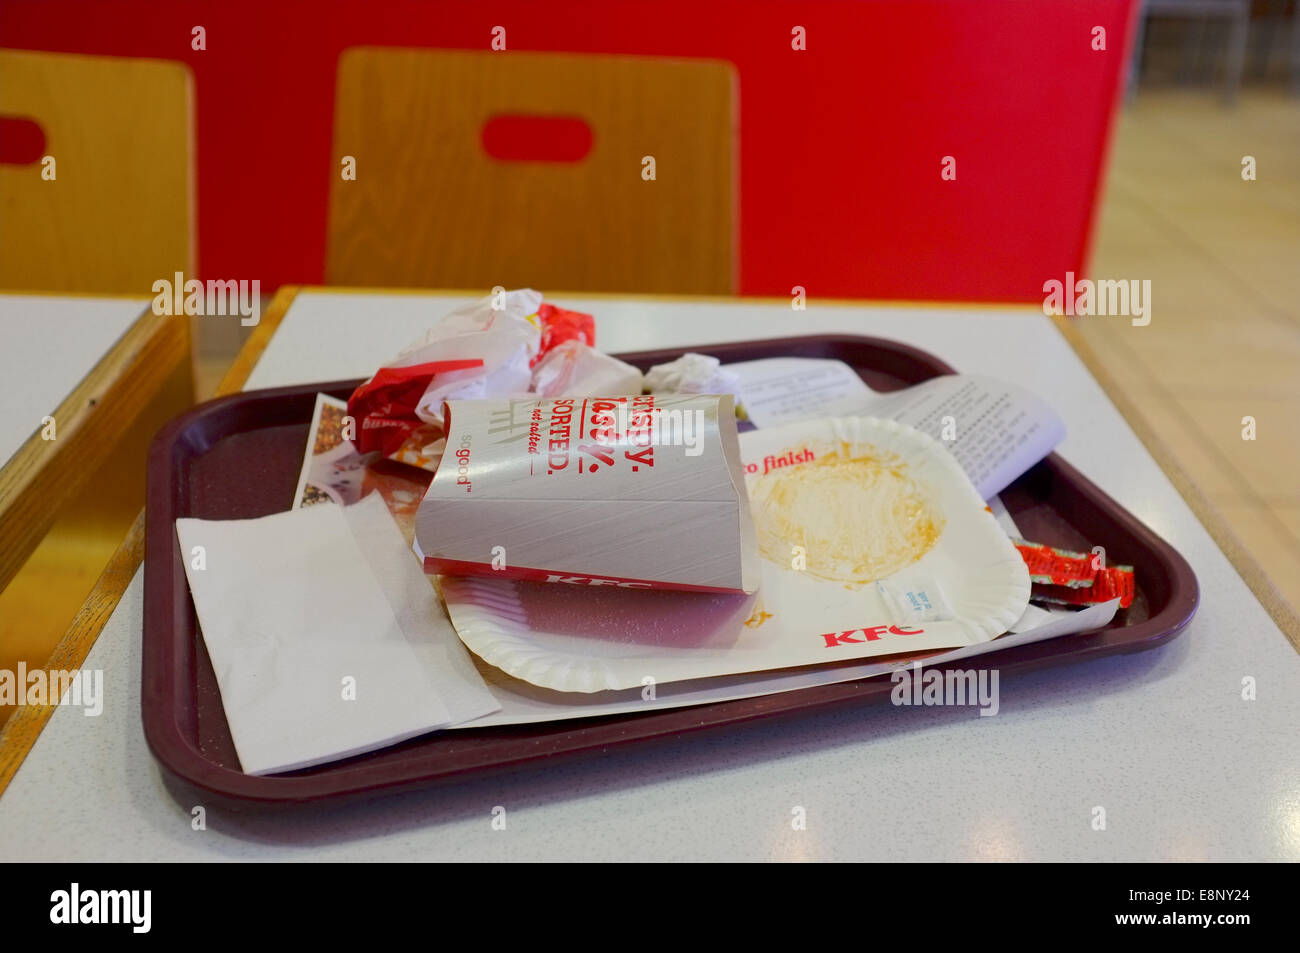 Kfc Tray On Table After A Meal Has Been Eaten Stock Photo Alamy